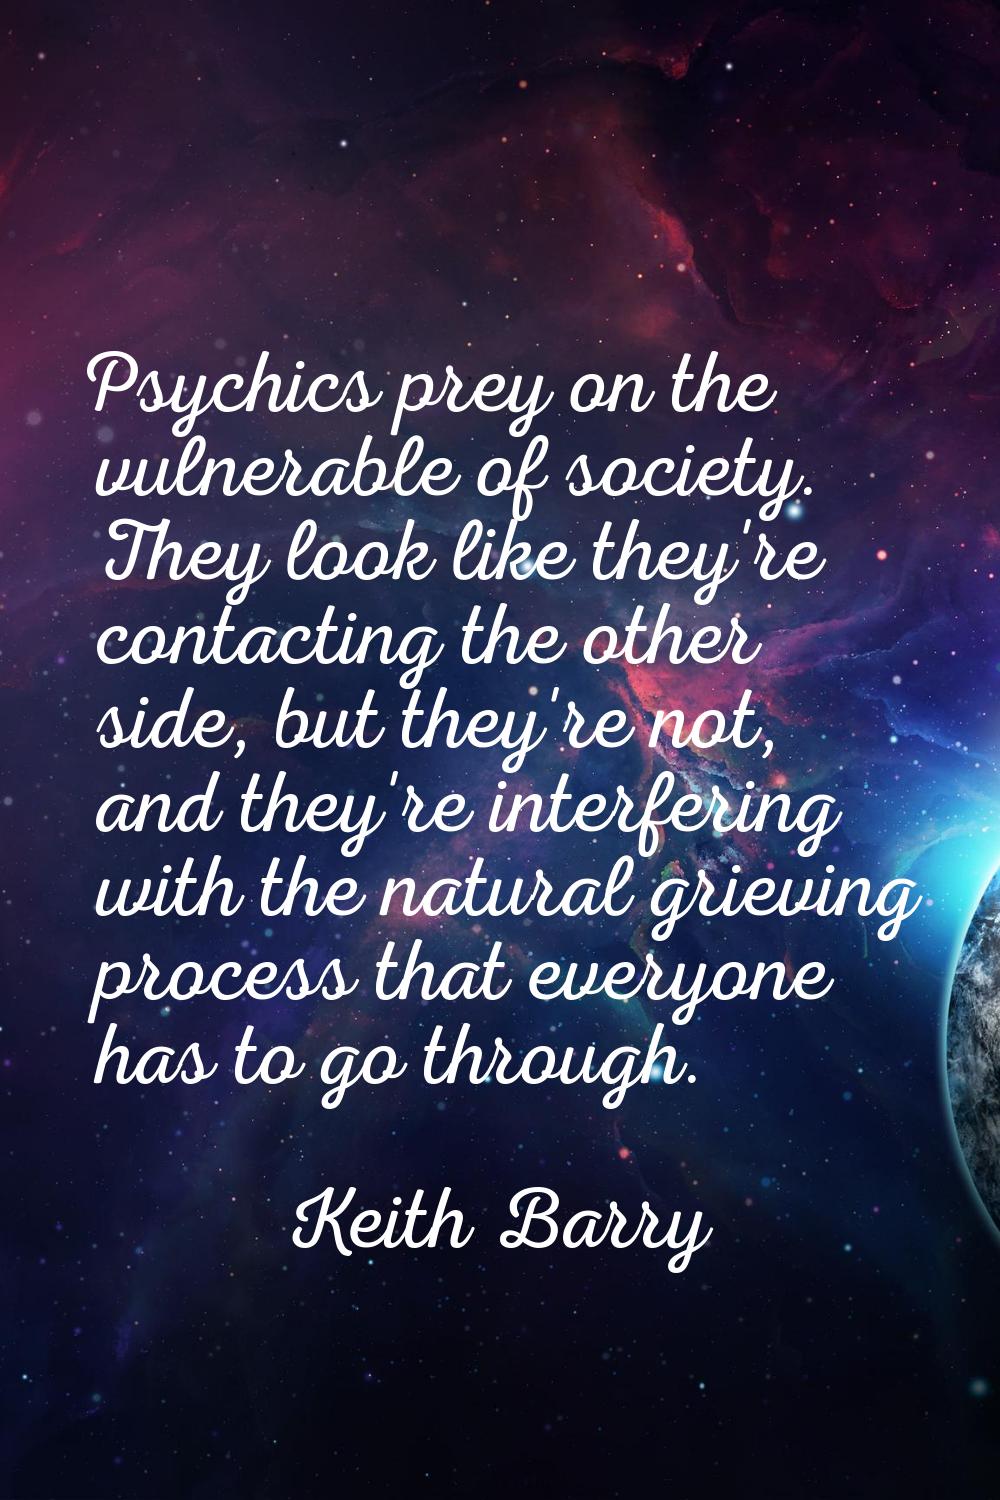 Psychics prey on the vulnerable of society. They look like they're contacting the other side, but t